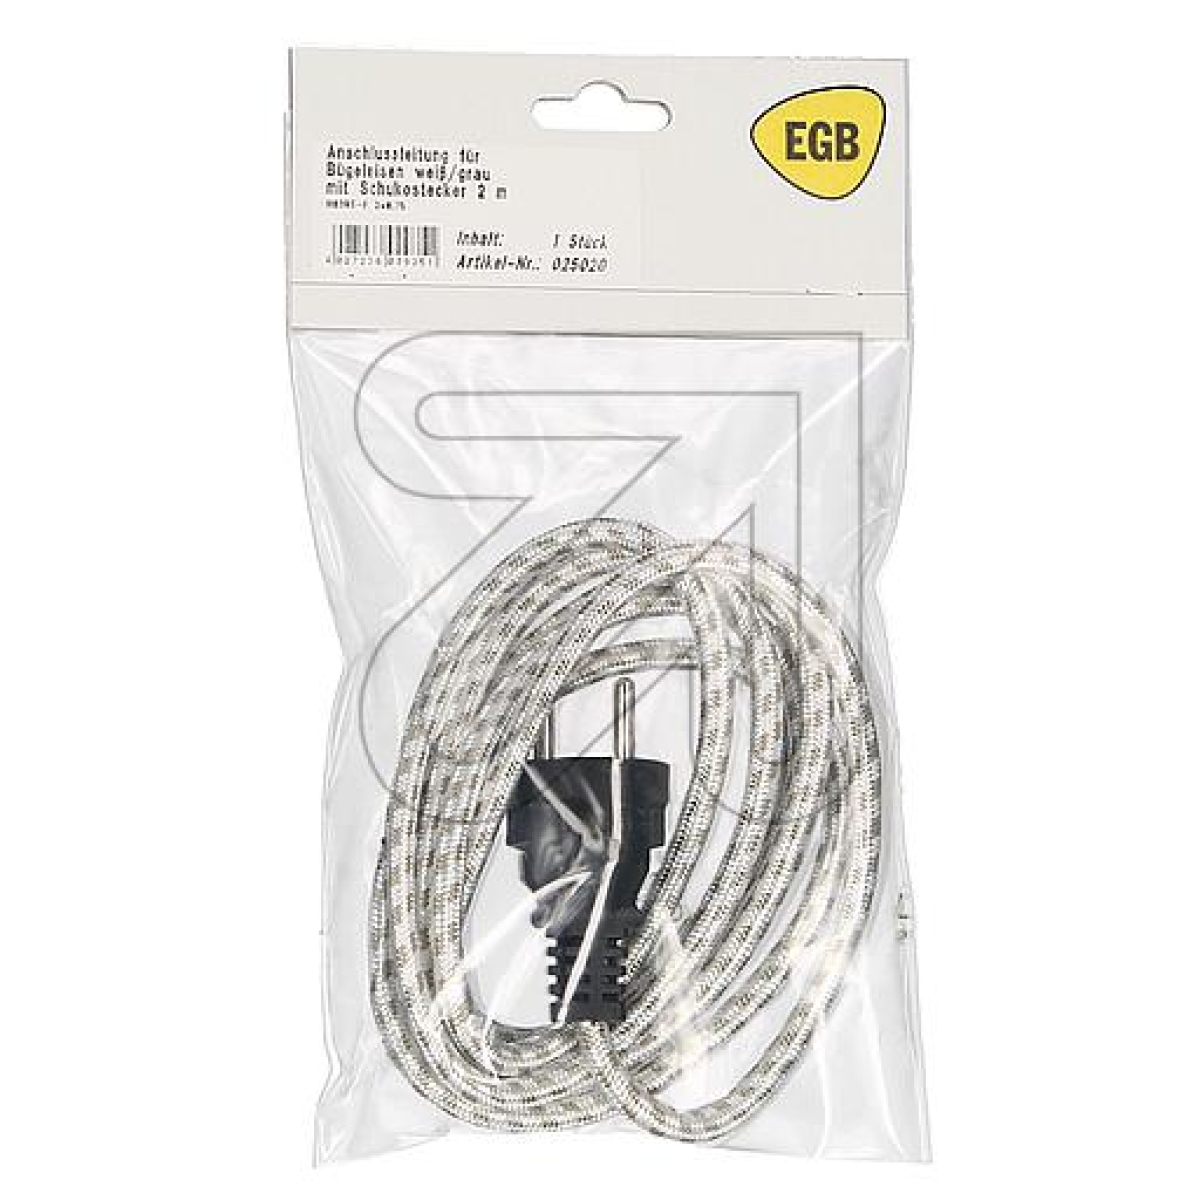 EGBSB iron connection cable 2.0m white/grey H03RT-F 3x0.75mm²Article-No: 025020